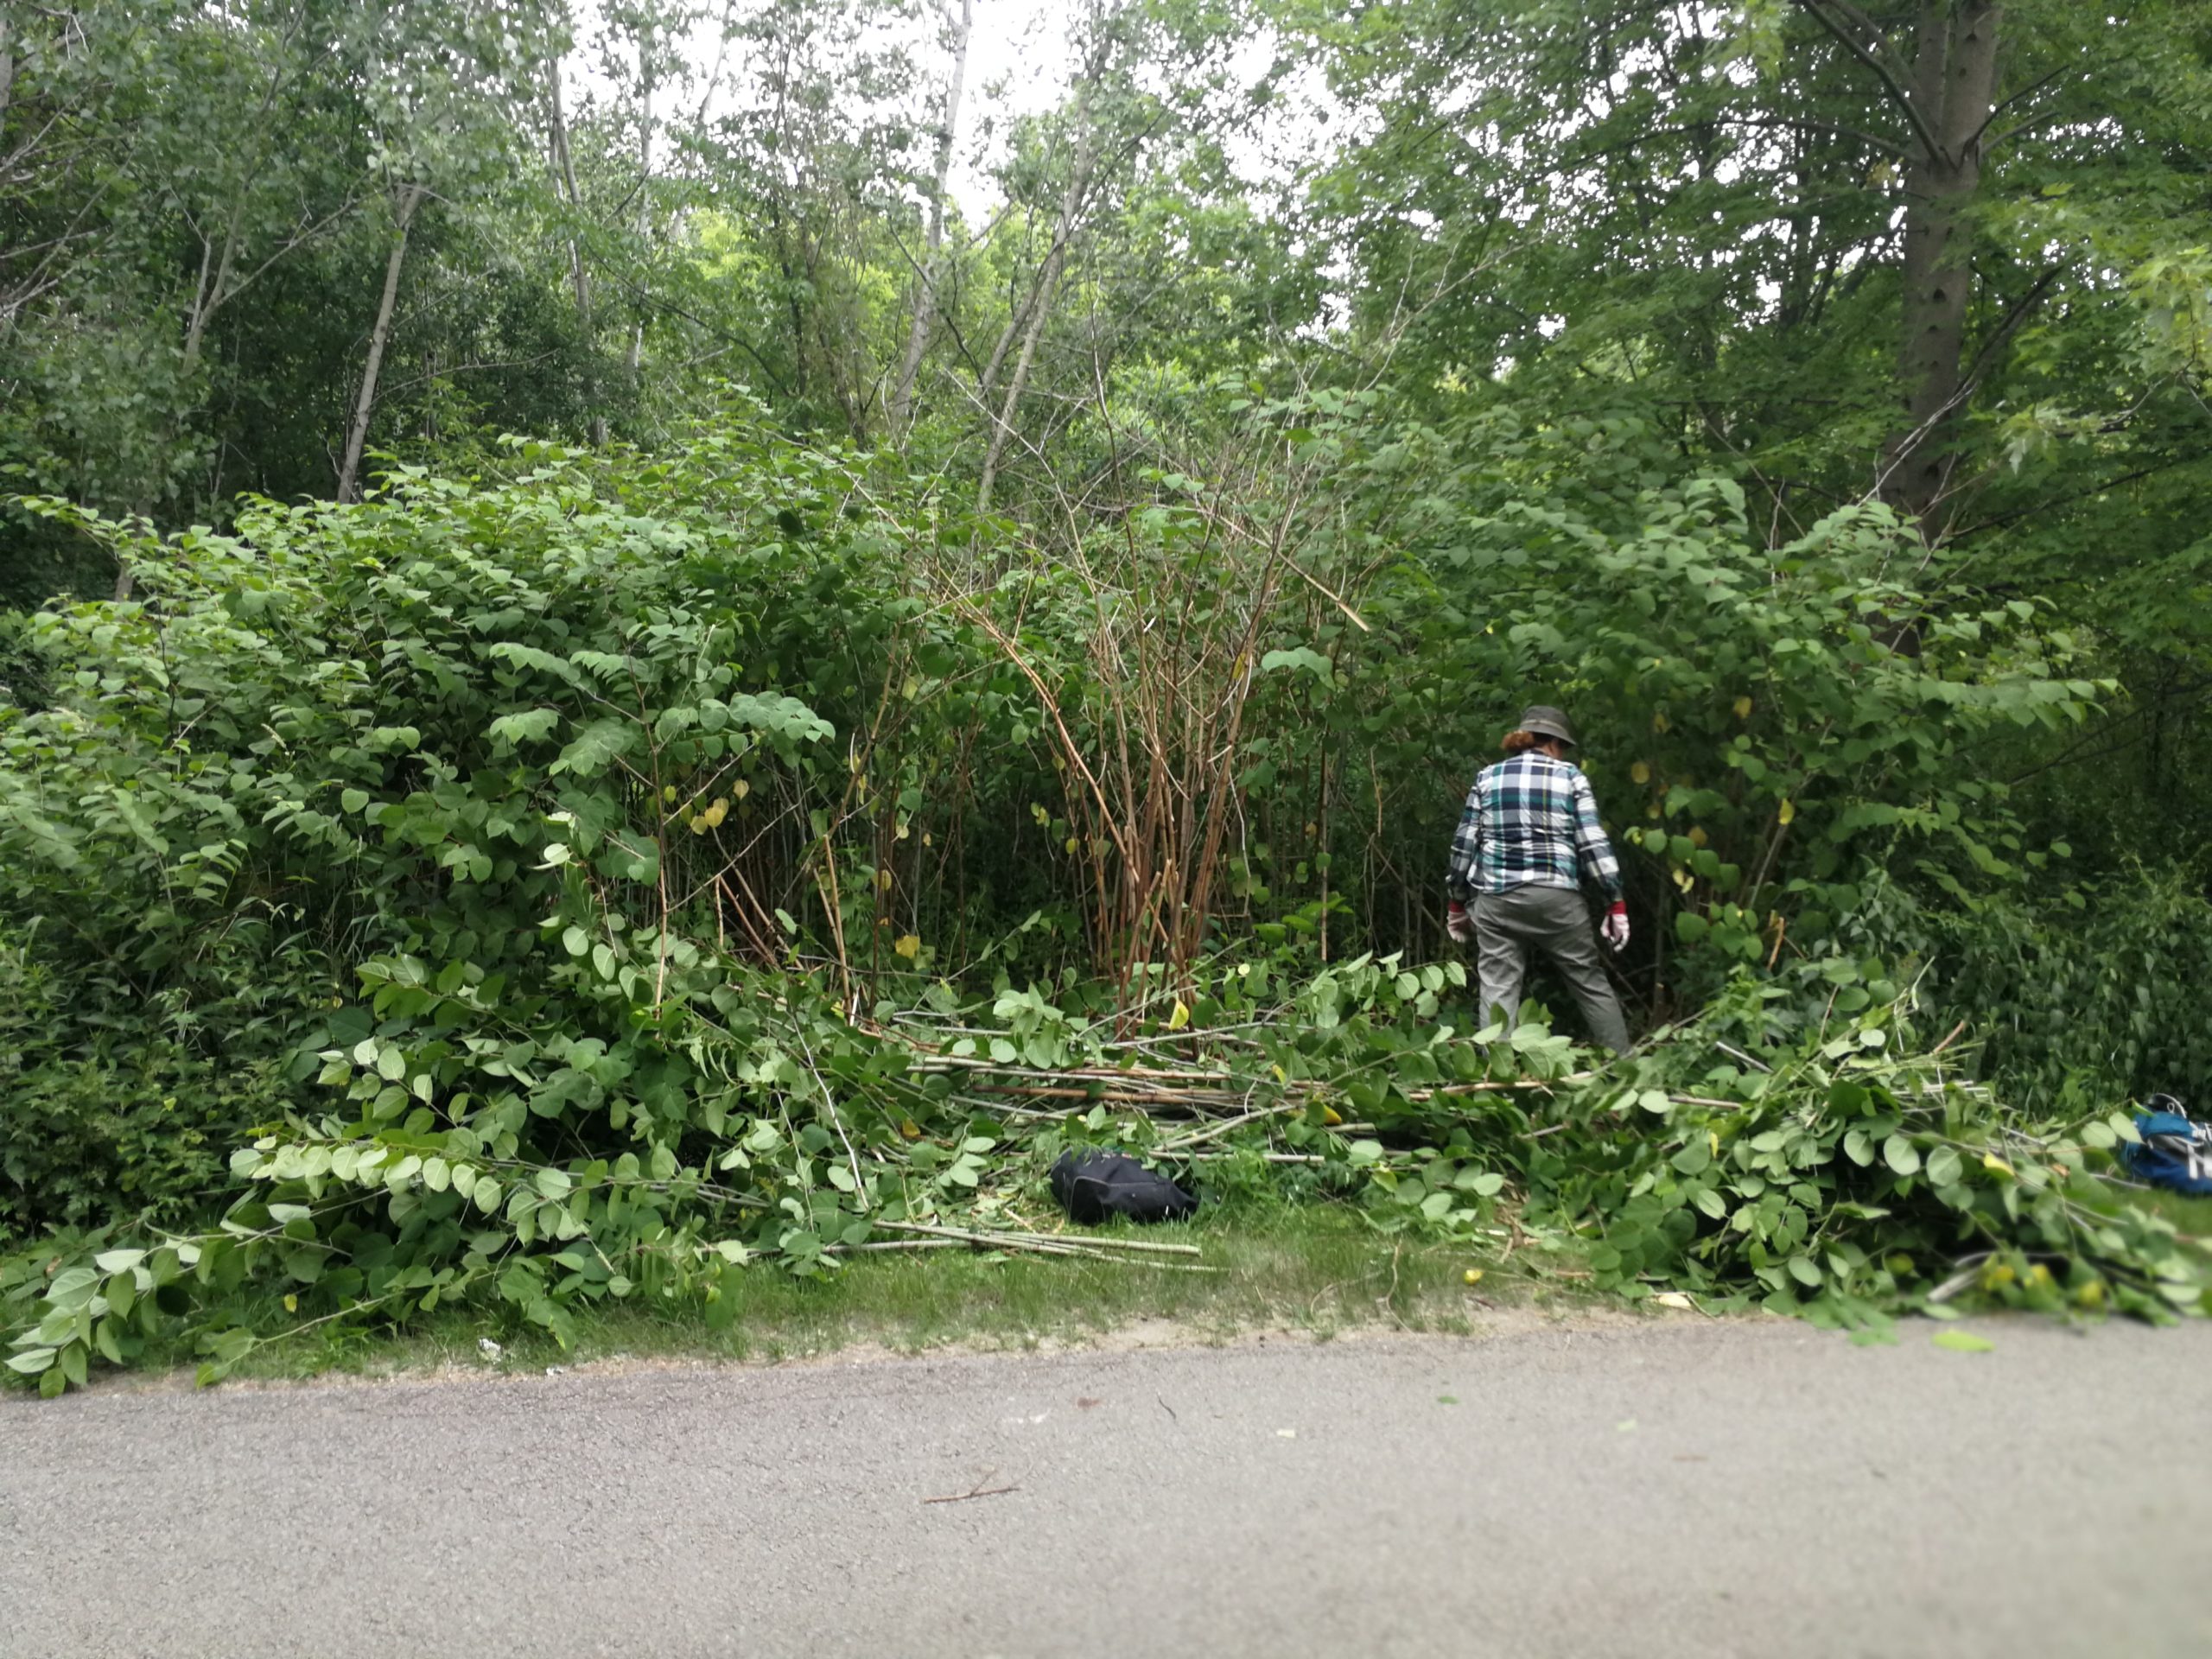 Stewards cutting down Japanese knotweed at Middle Mills, 2021